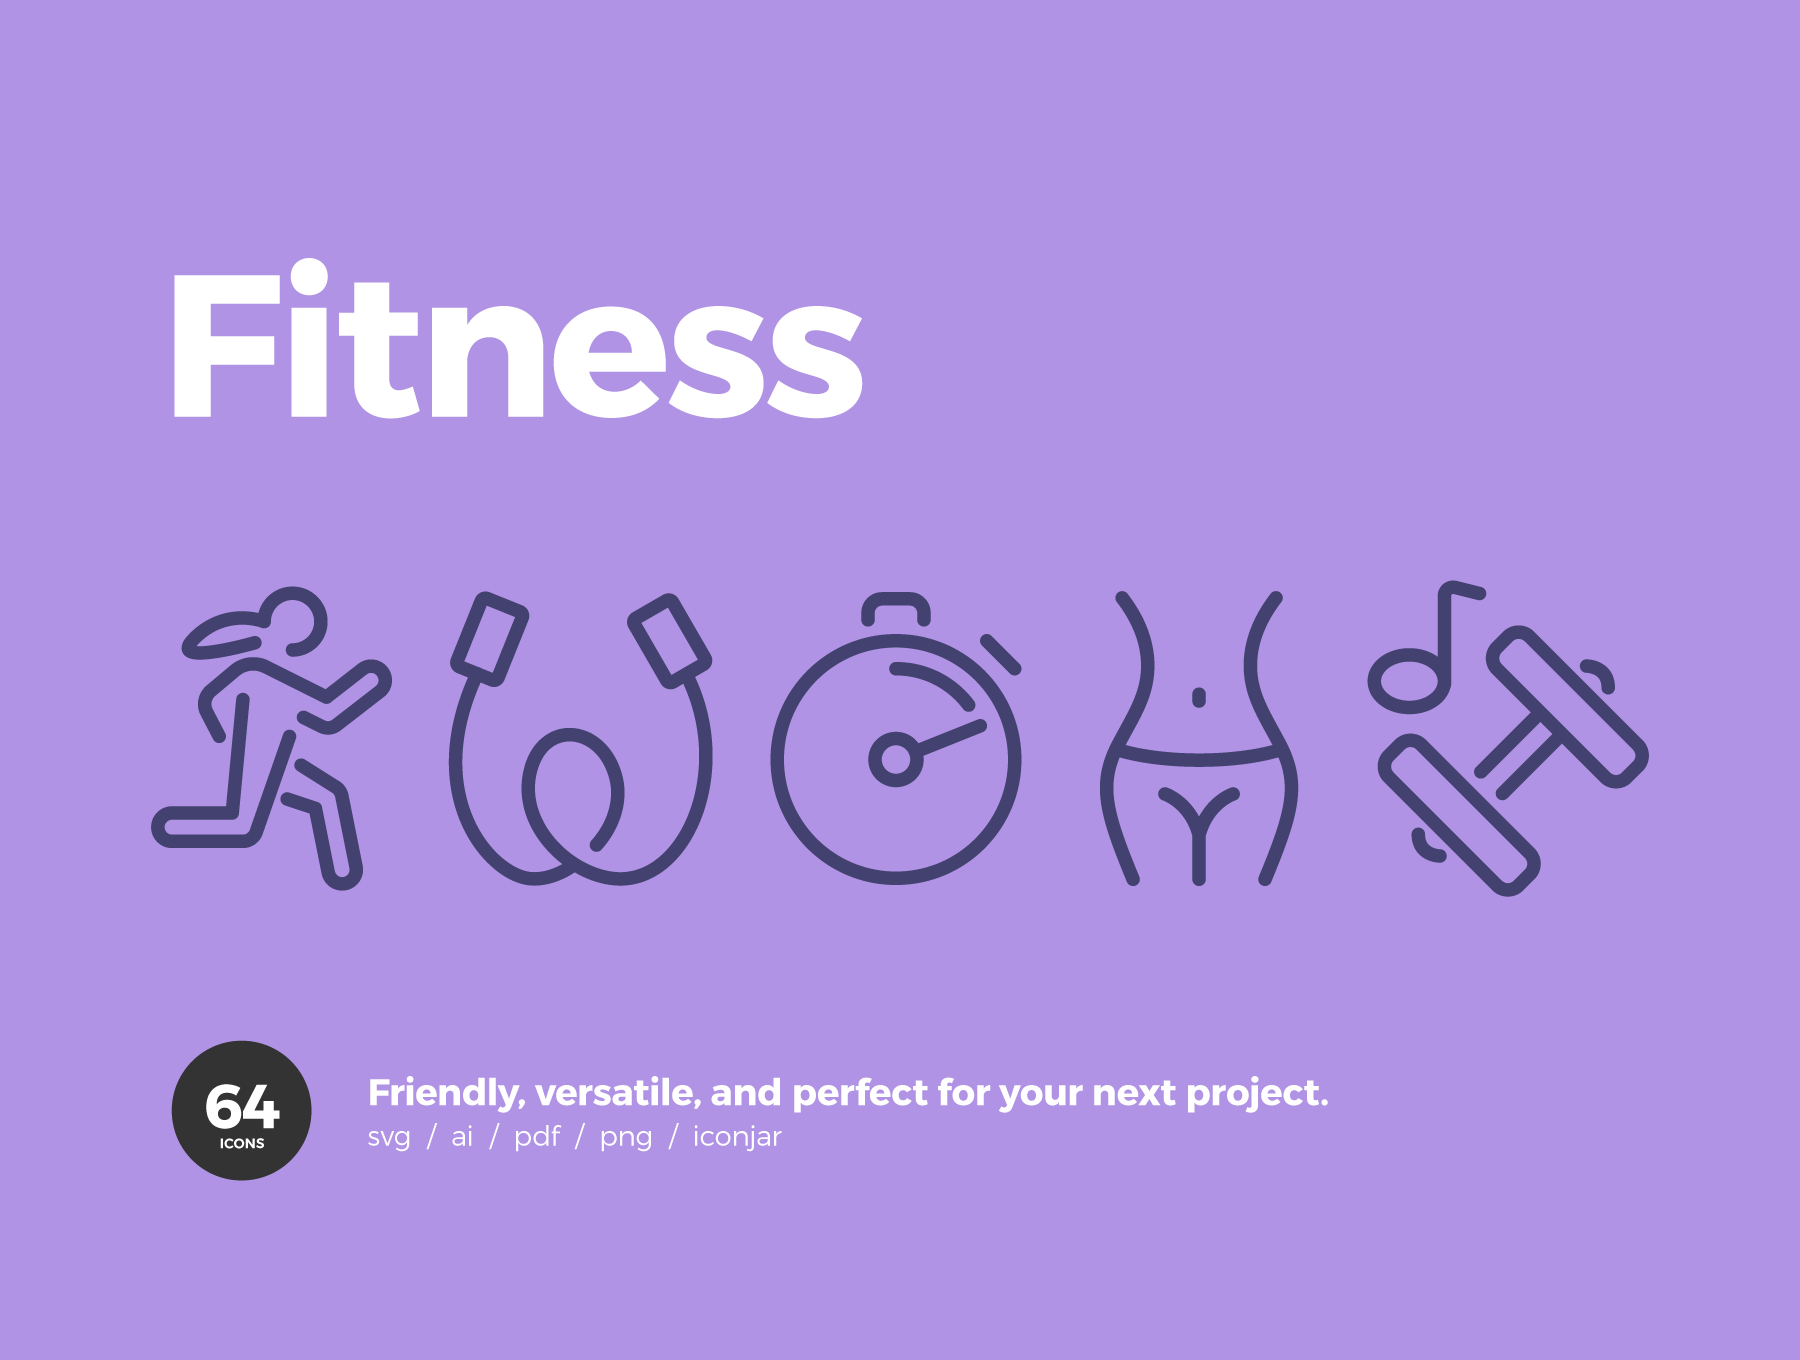 fitness-icons-vector-line-icon-set-1_1573691024319